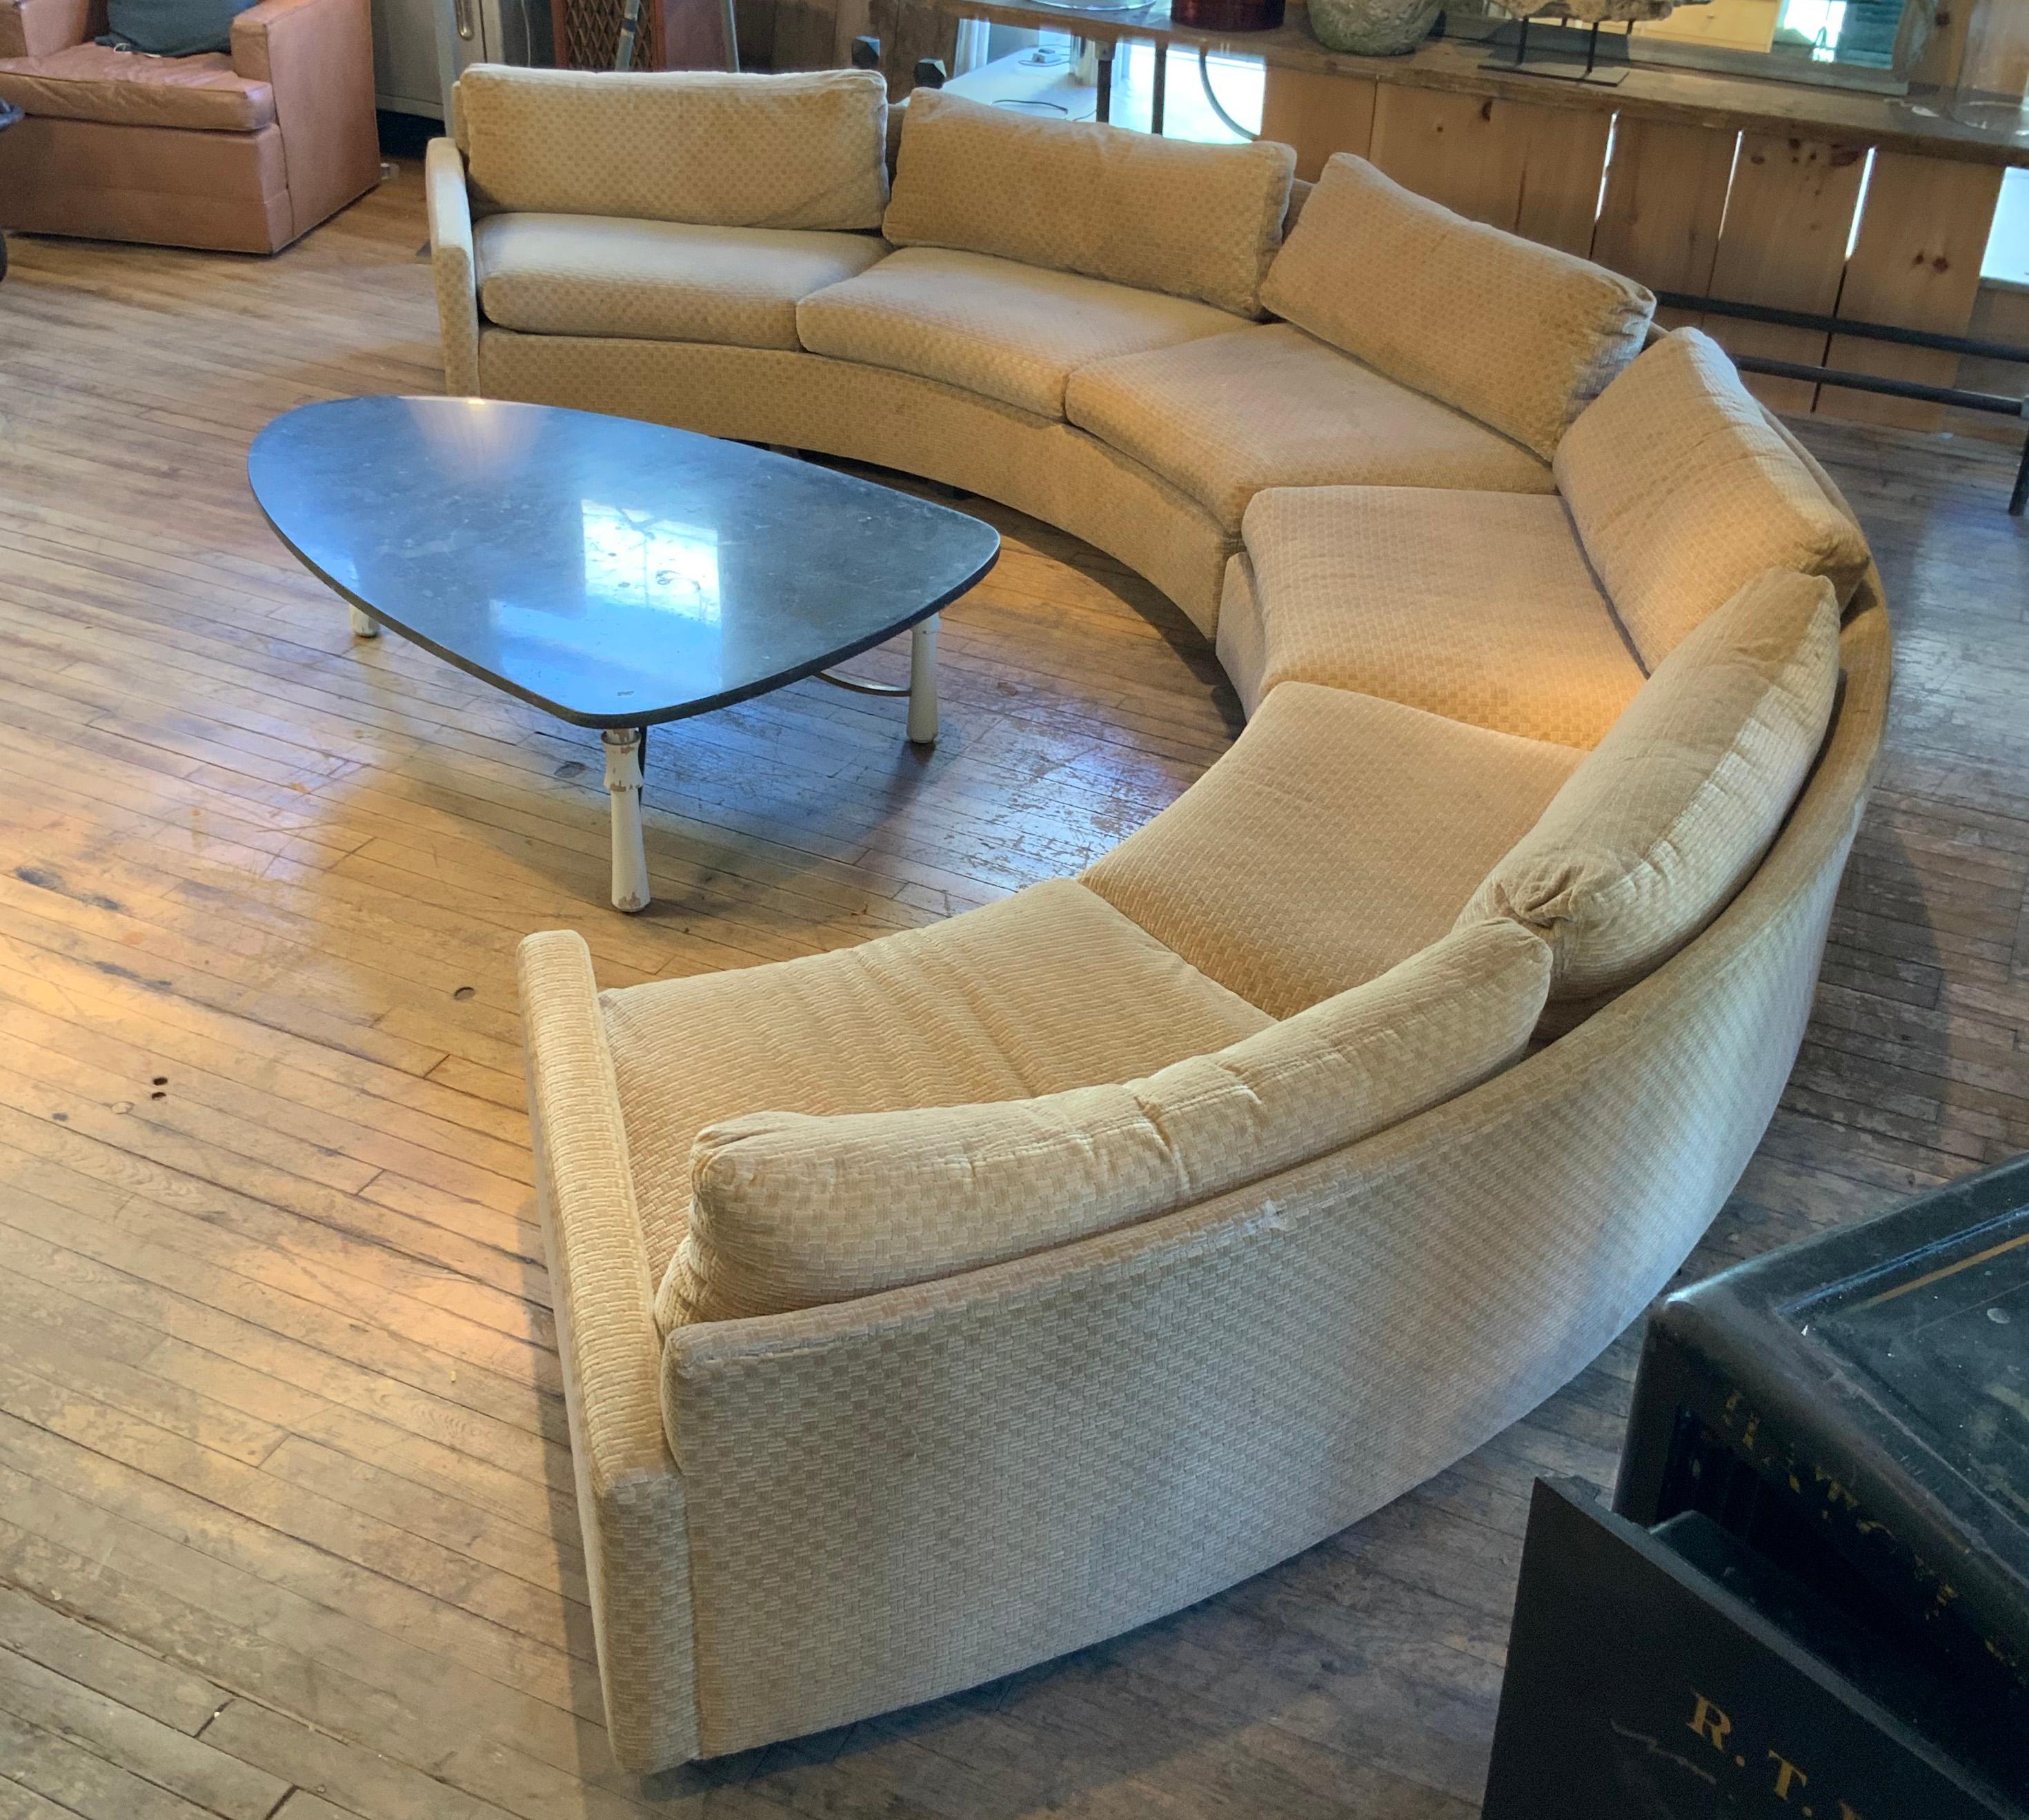 An outstanding large curved semi-circular sectional sofa designed by Milo Baughman for Thayer Coggin, circa 1970. Fantastic shape and proportions make this a very comfortable sofa. Can be placed with both sections together making a complete